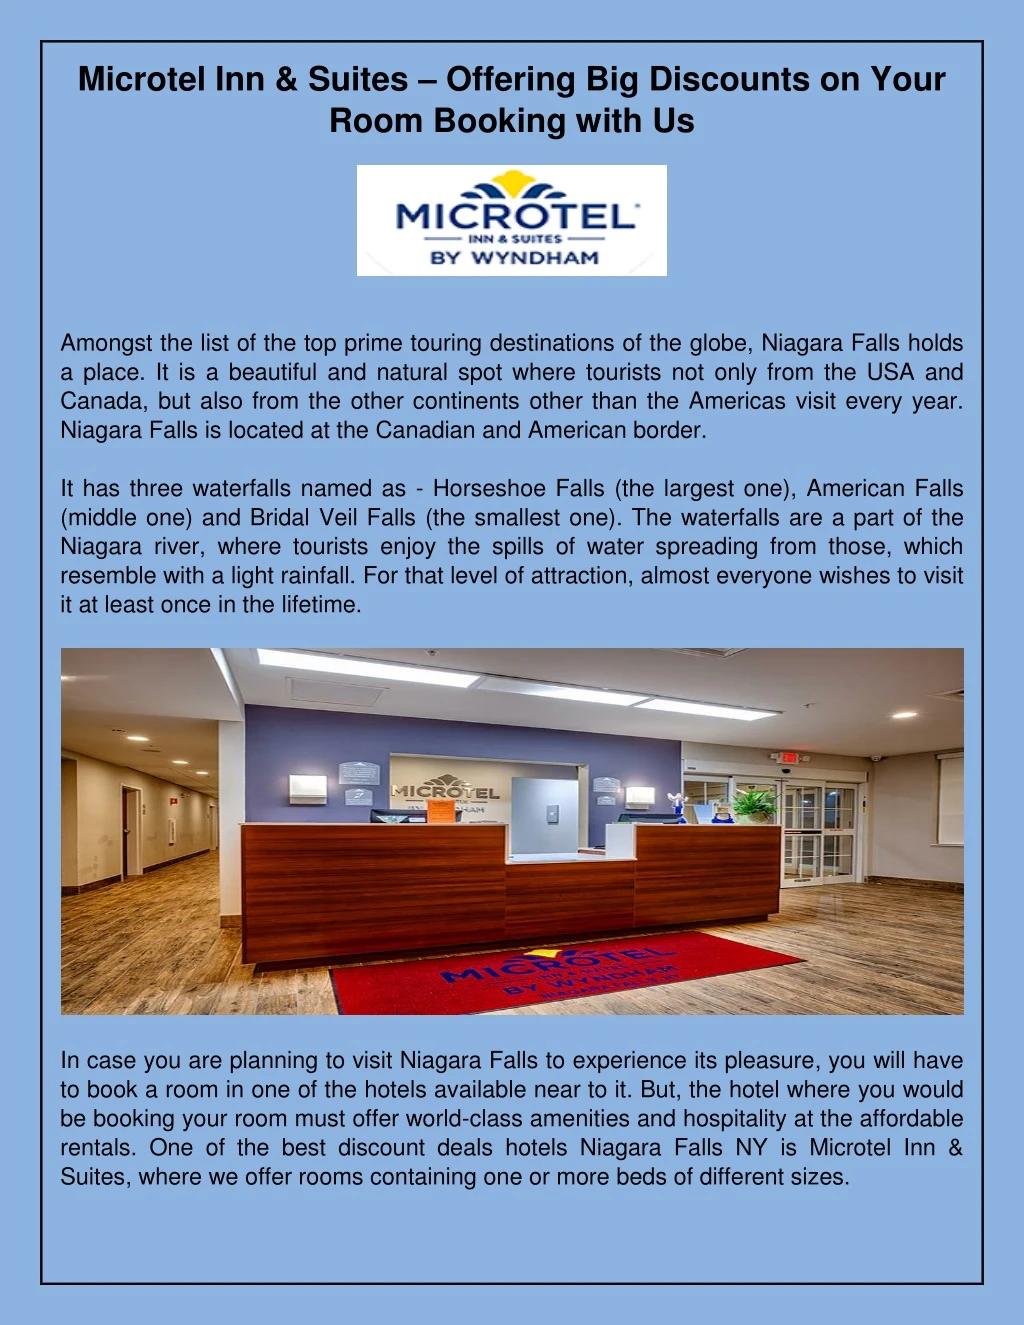 microtel inn suites offering big discounts